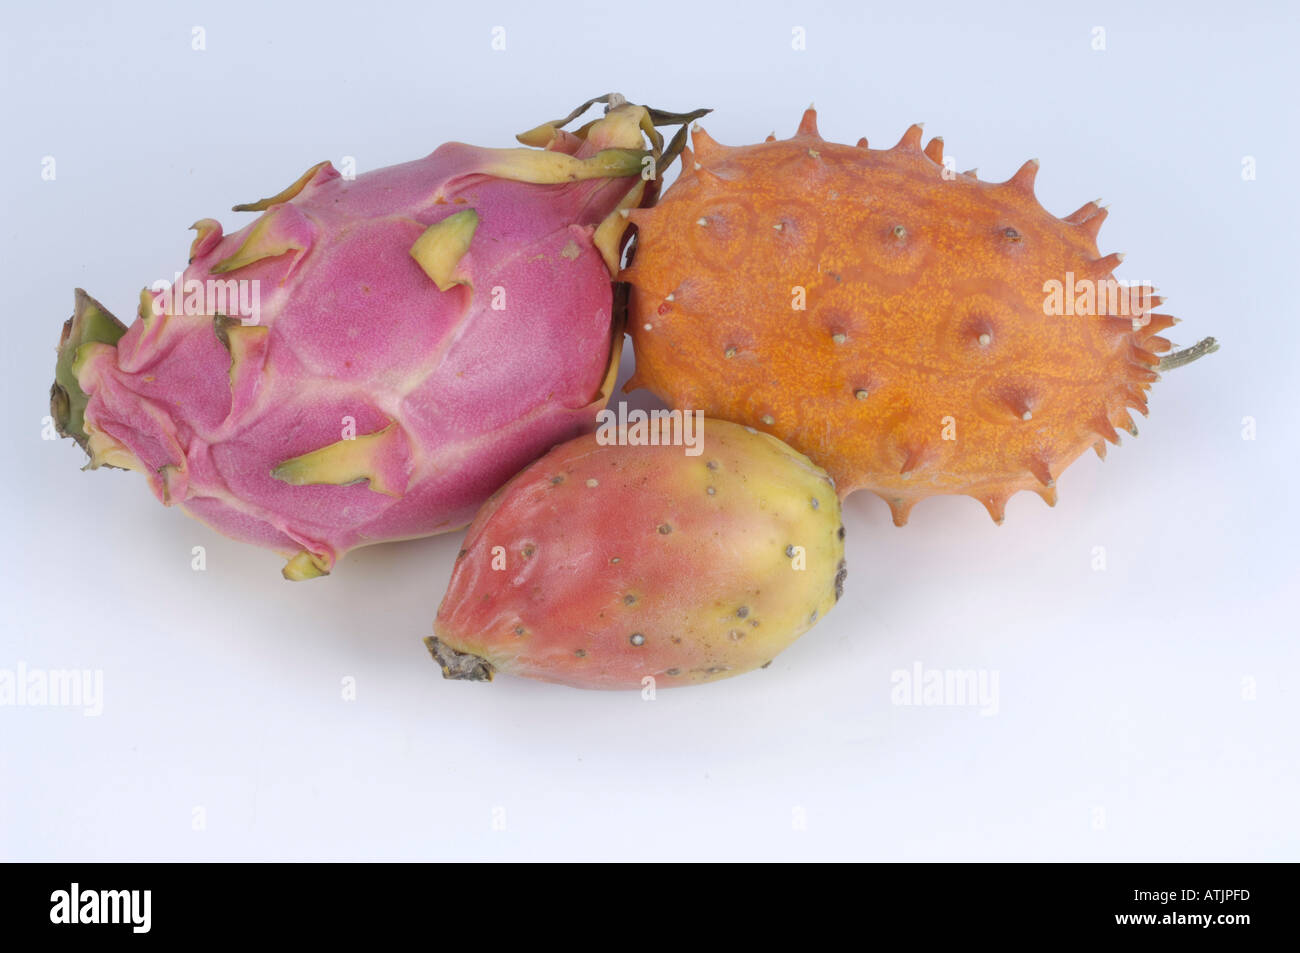 Tropical fruits Stock Photo